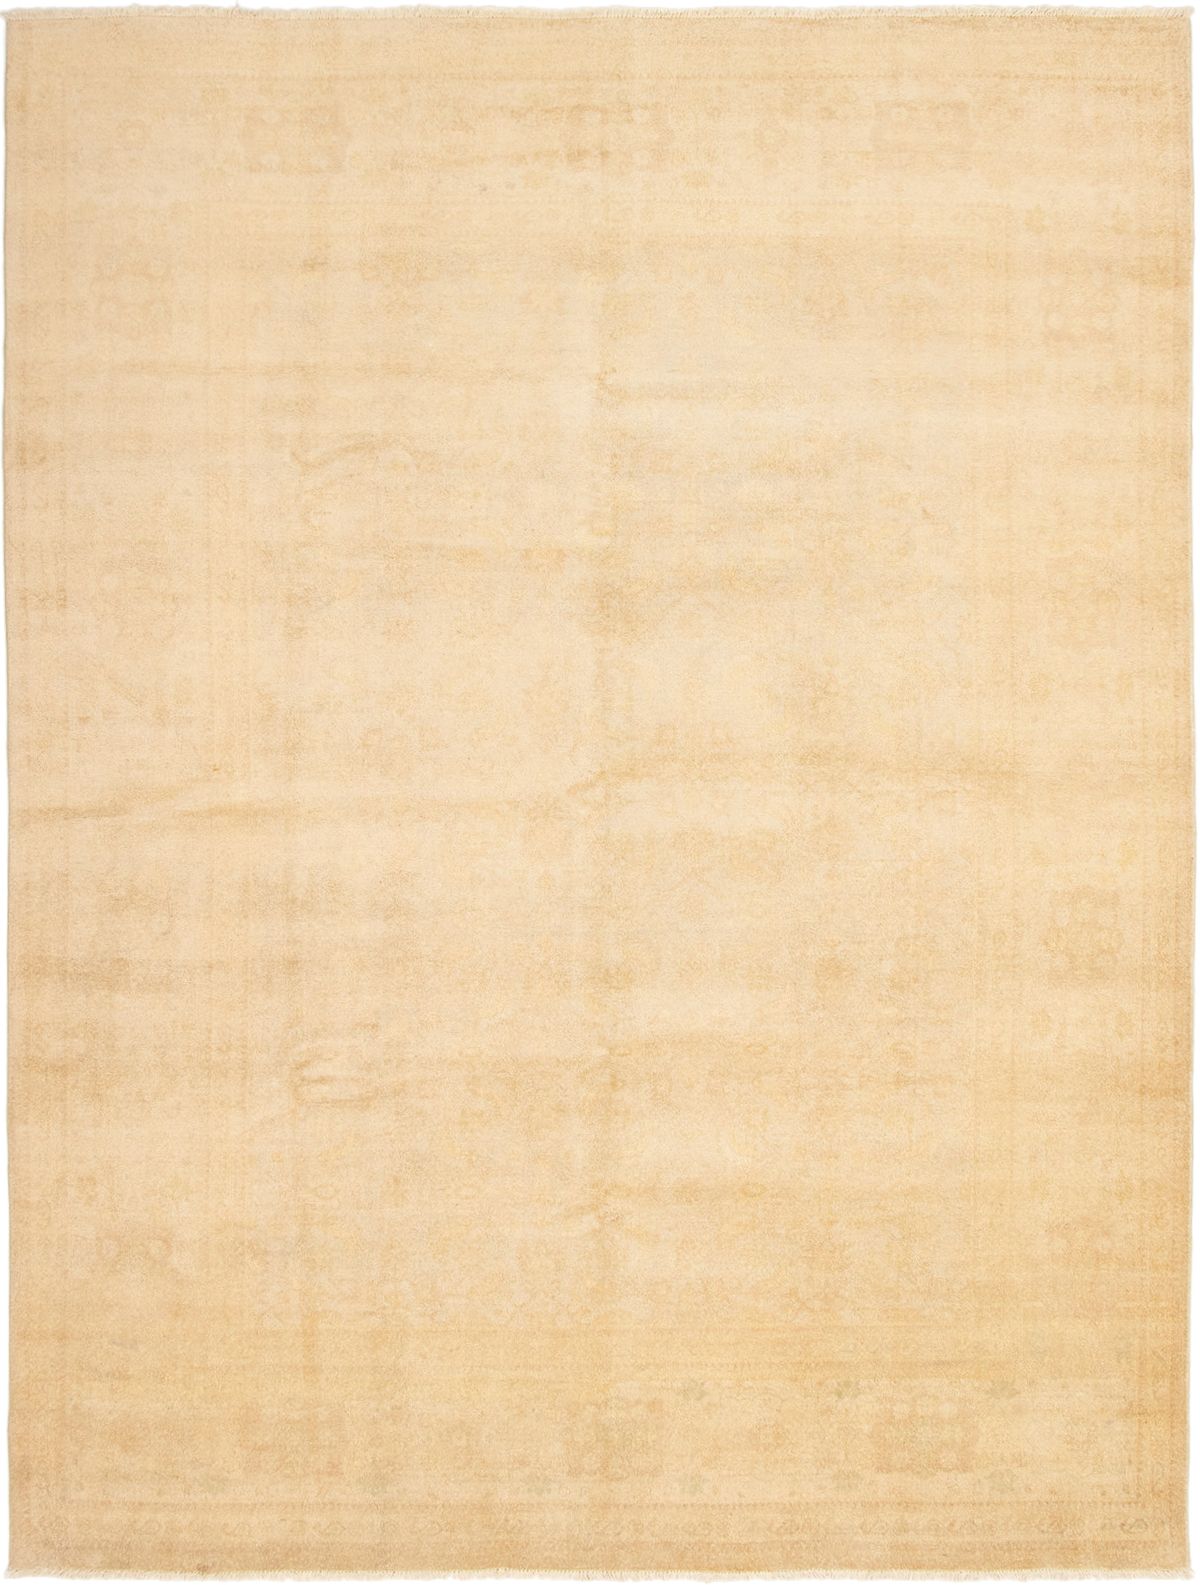 Hand-knotted Color Transition Light Khaki Wool Rug 8'10" x 11'8" Size: 8'10" x 11'8"  